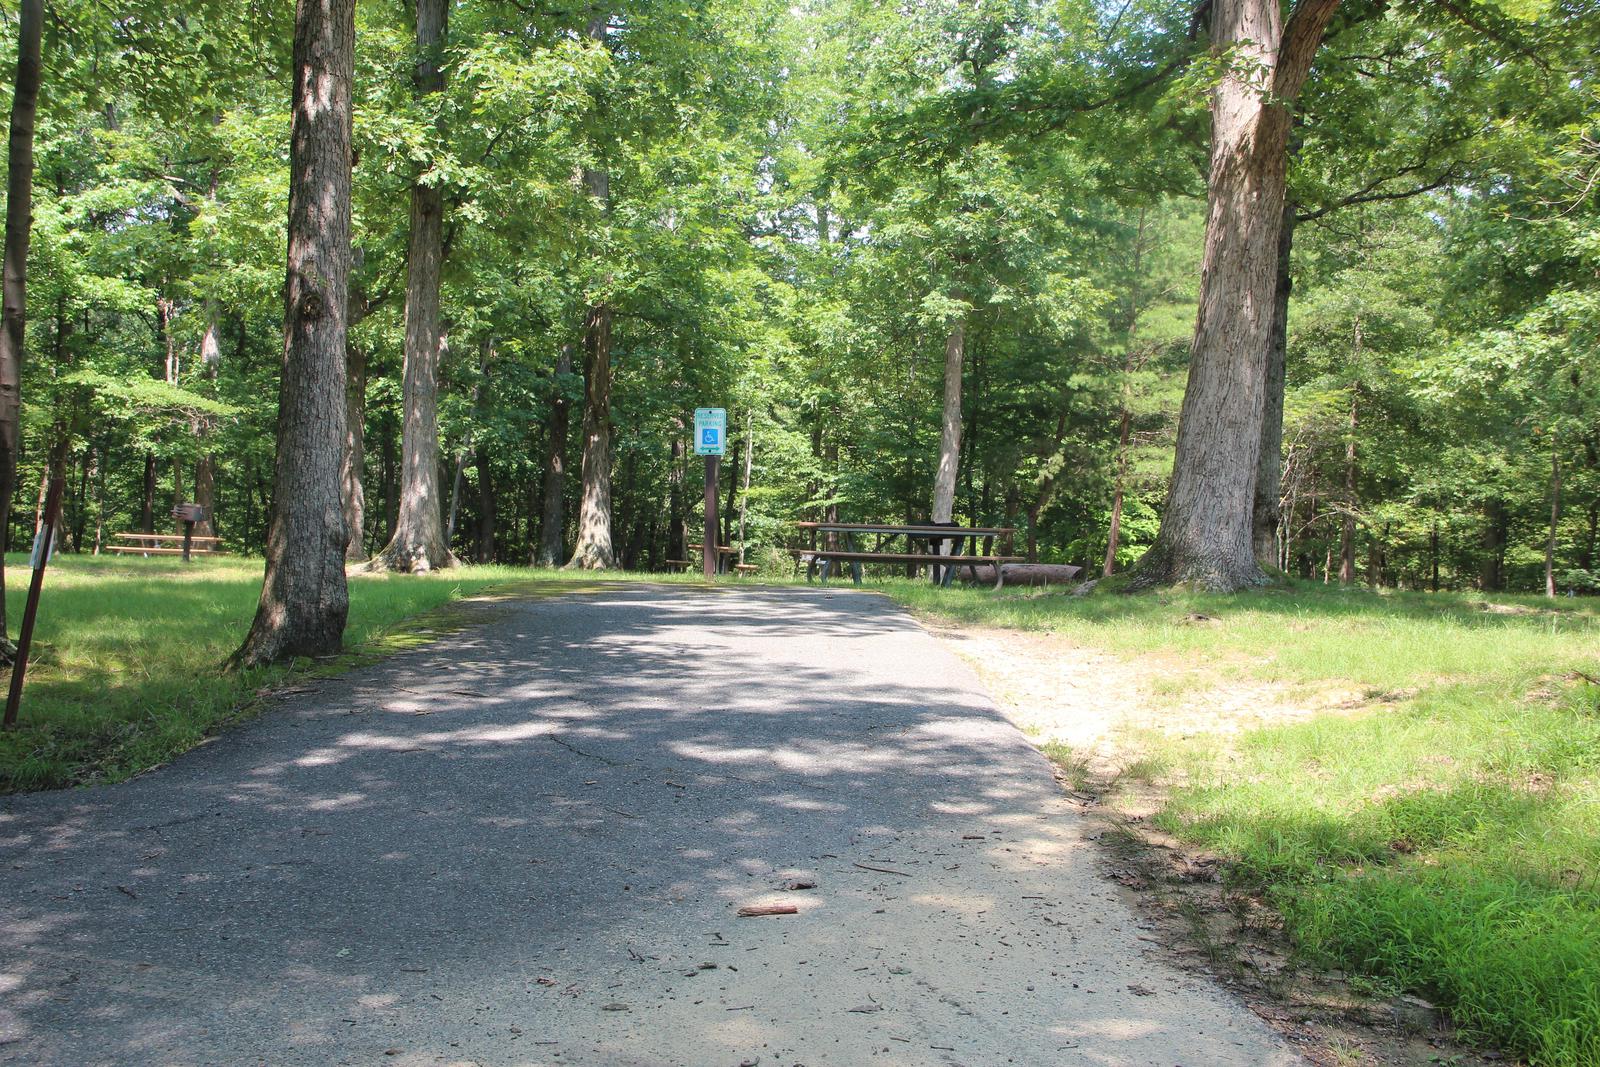 C106 C Loop of the Greenbelt Park Md campground C106 C Loop of the Greenbelt Park Maryland campground (former Site 109 HC )